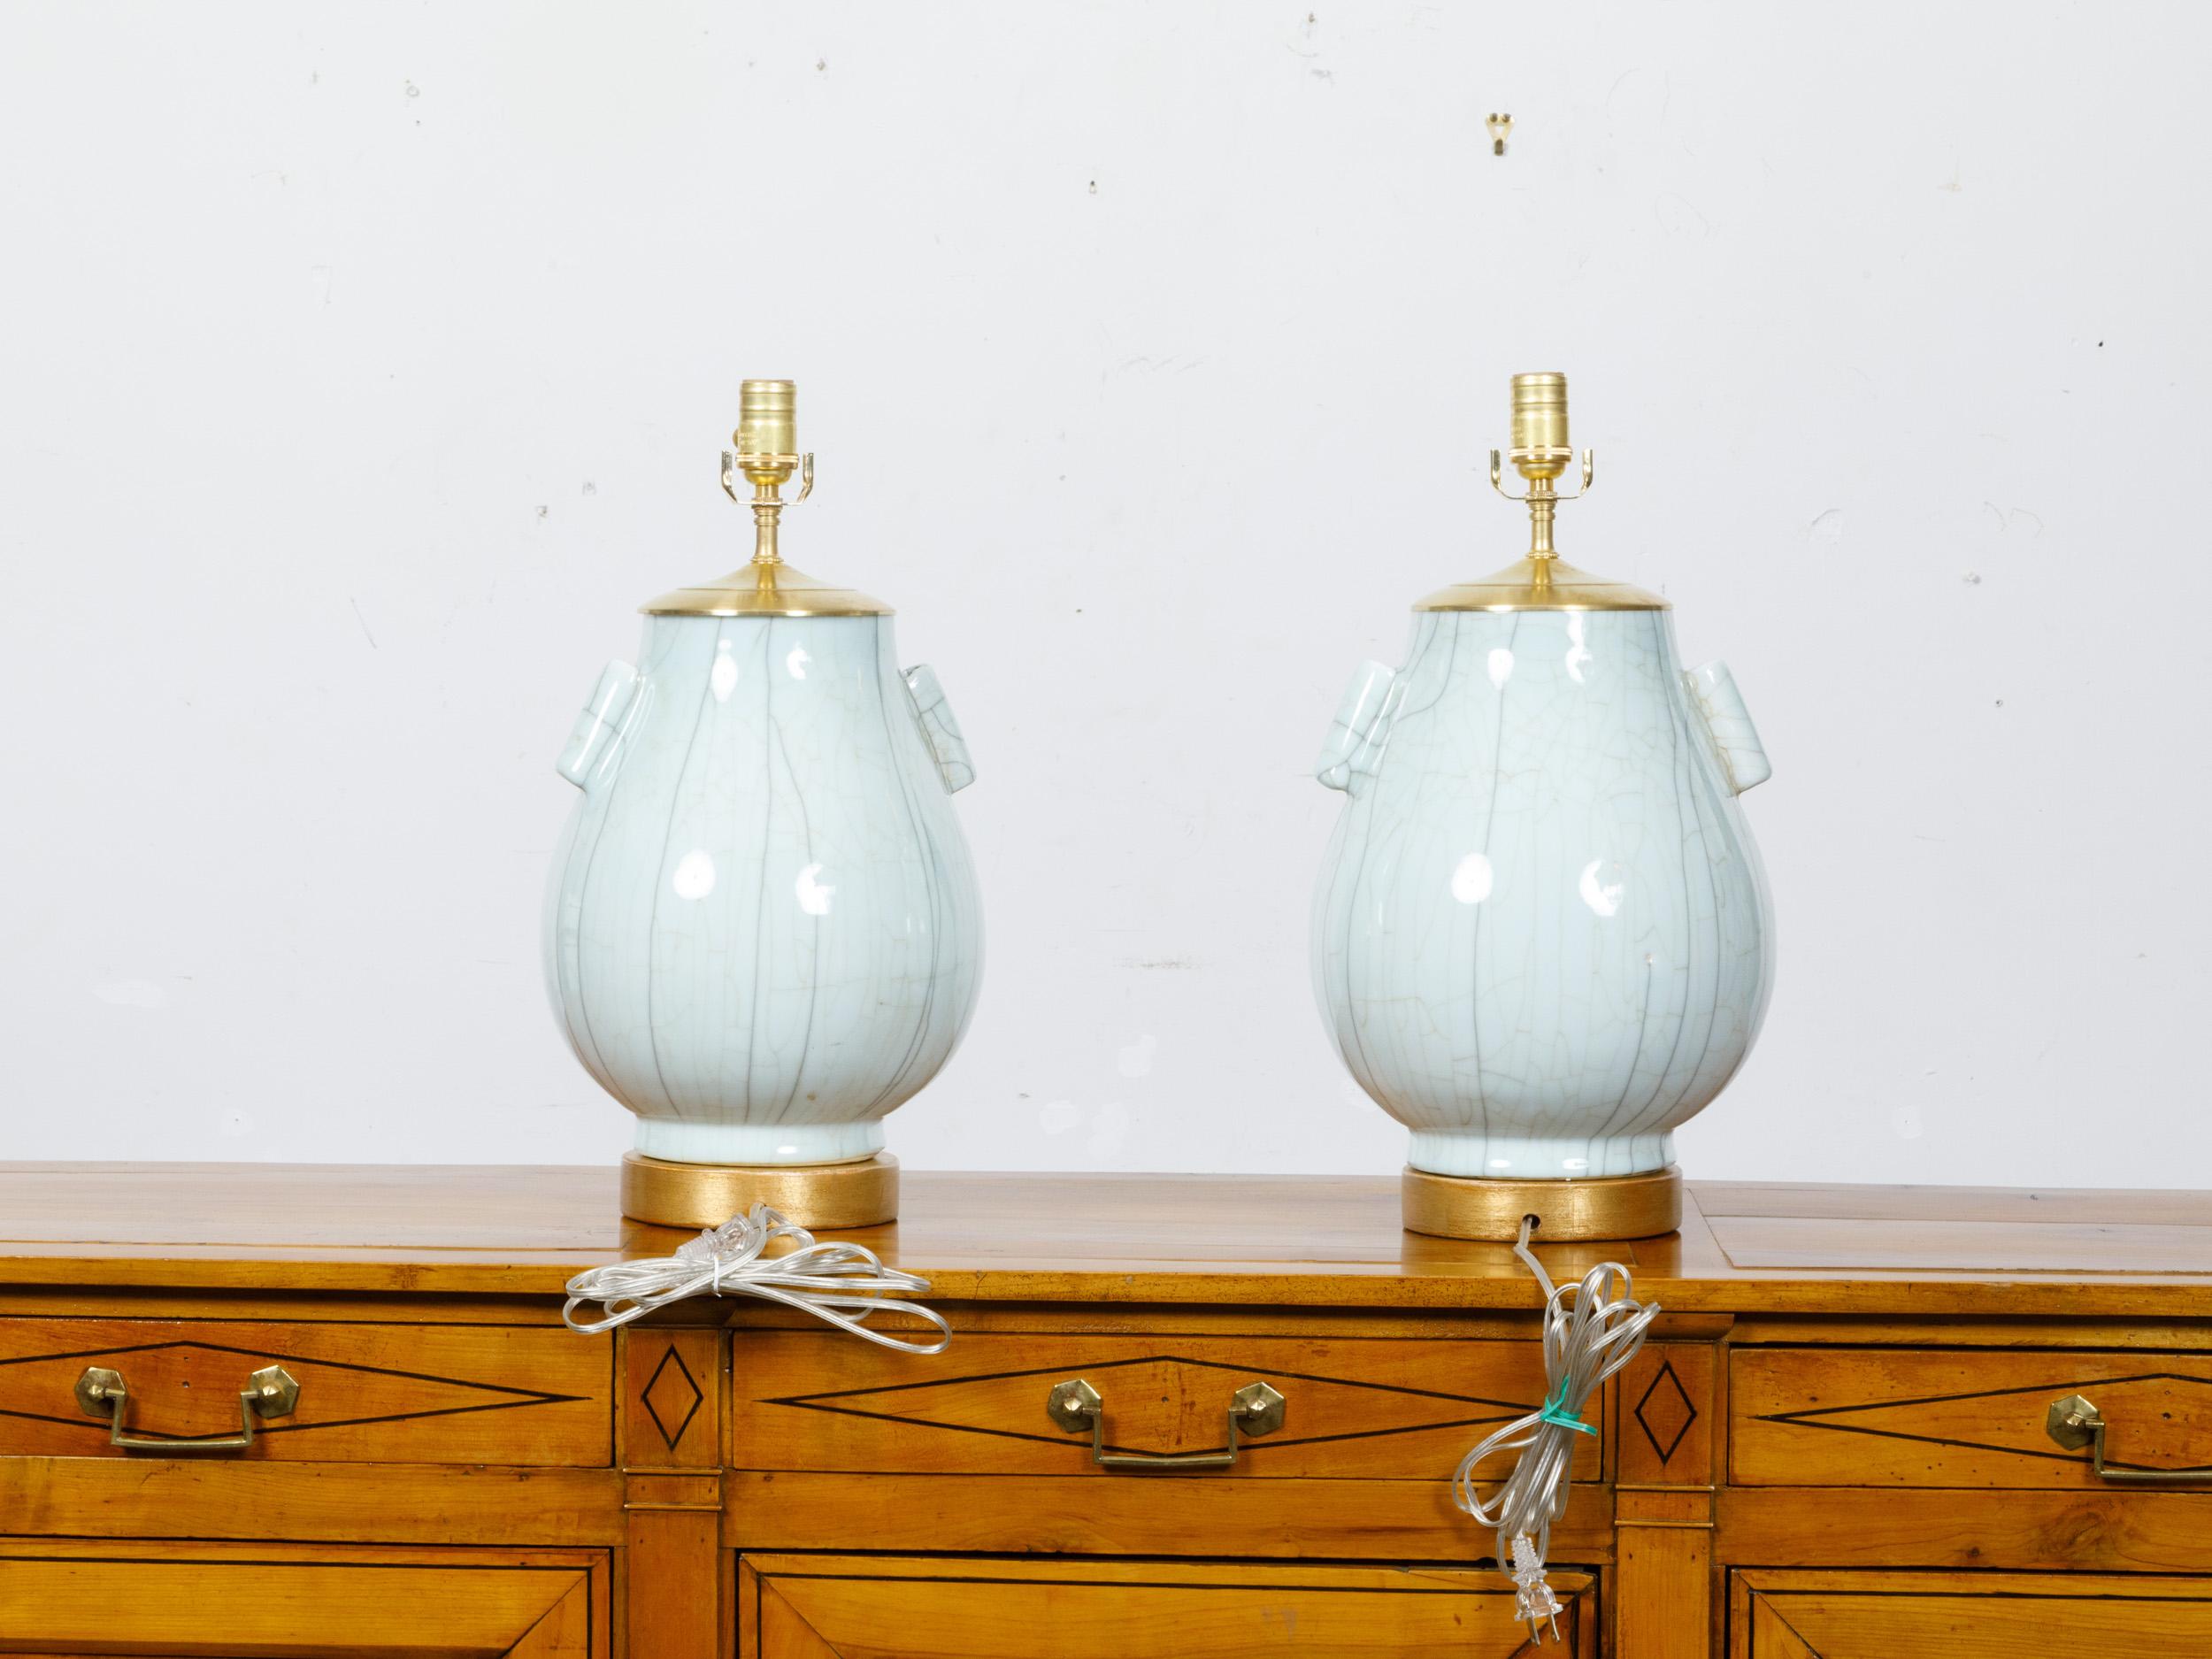 Gilt Pair of White Porcelain Tulip Shaped Vases with Crackle Finish Made into Lamps For Sale